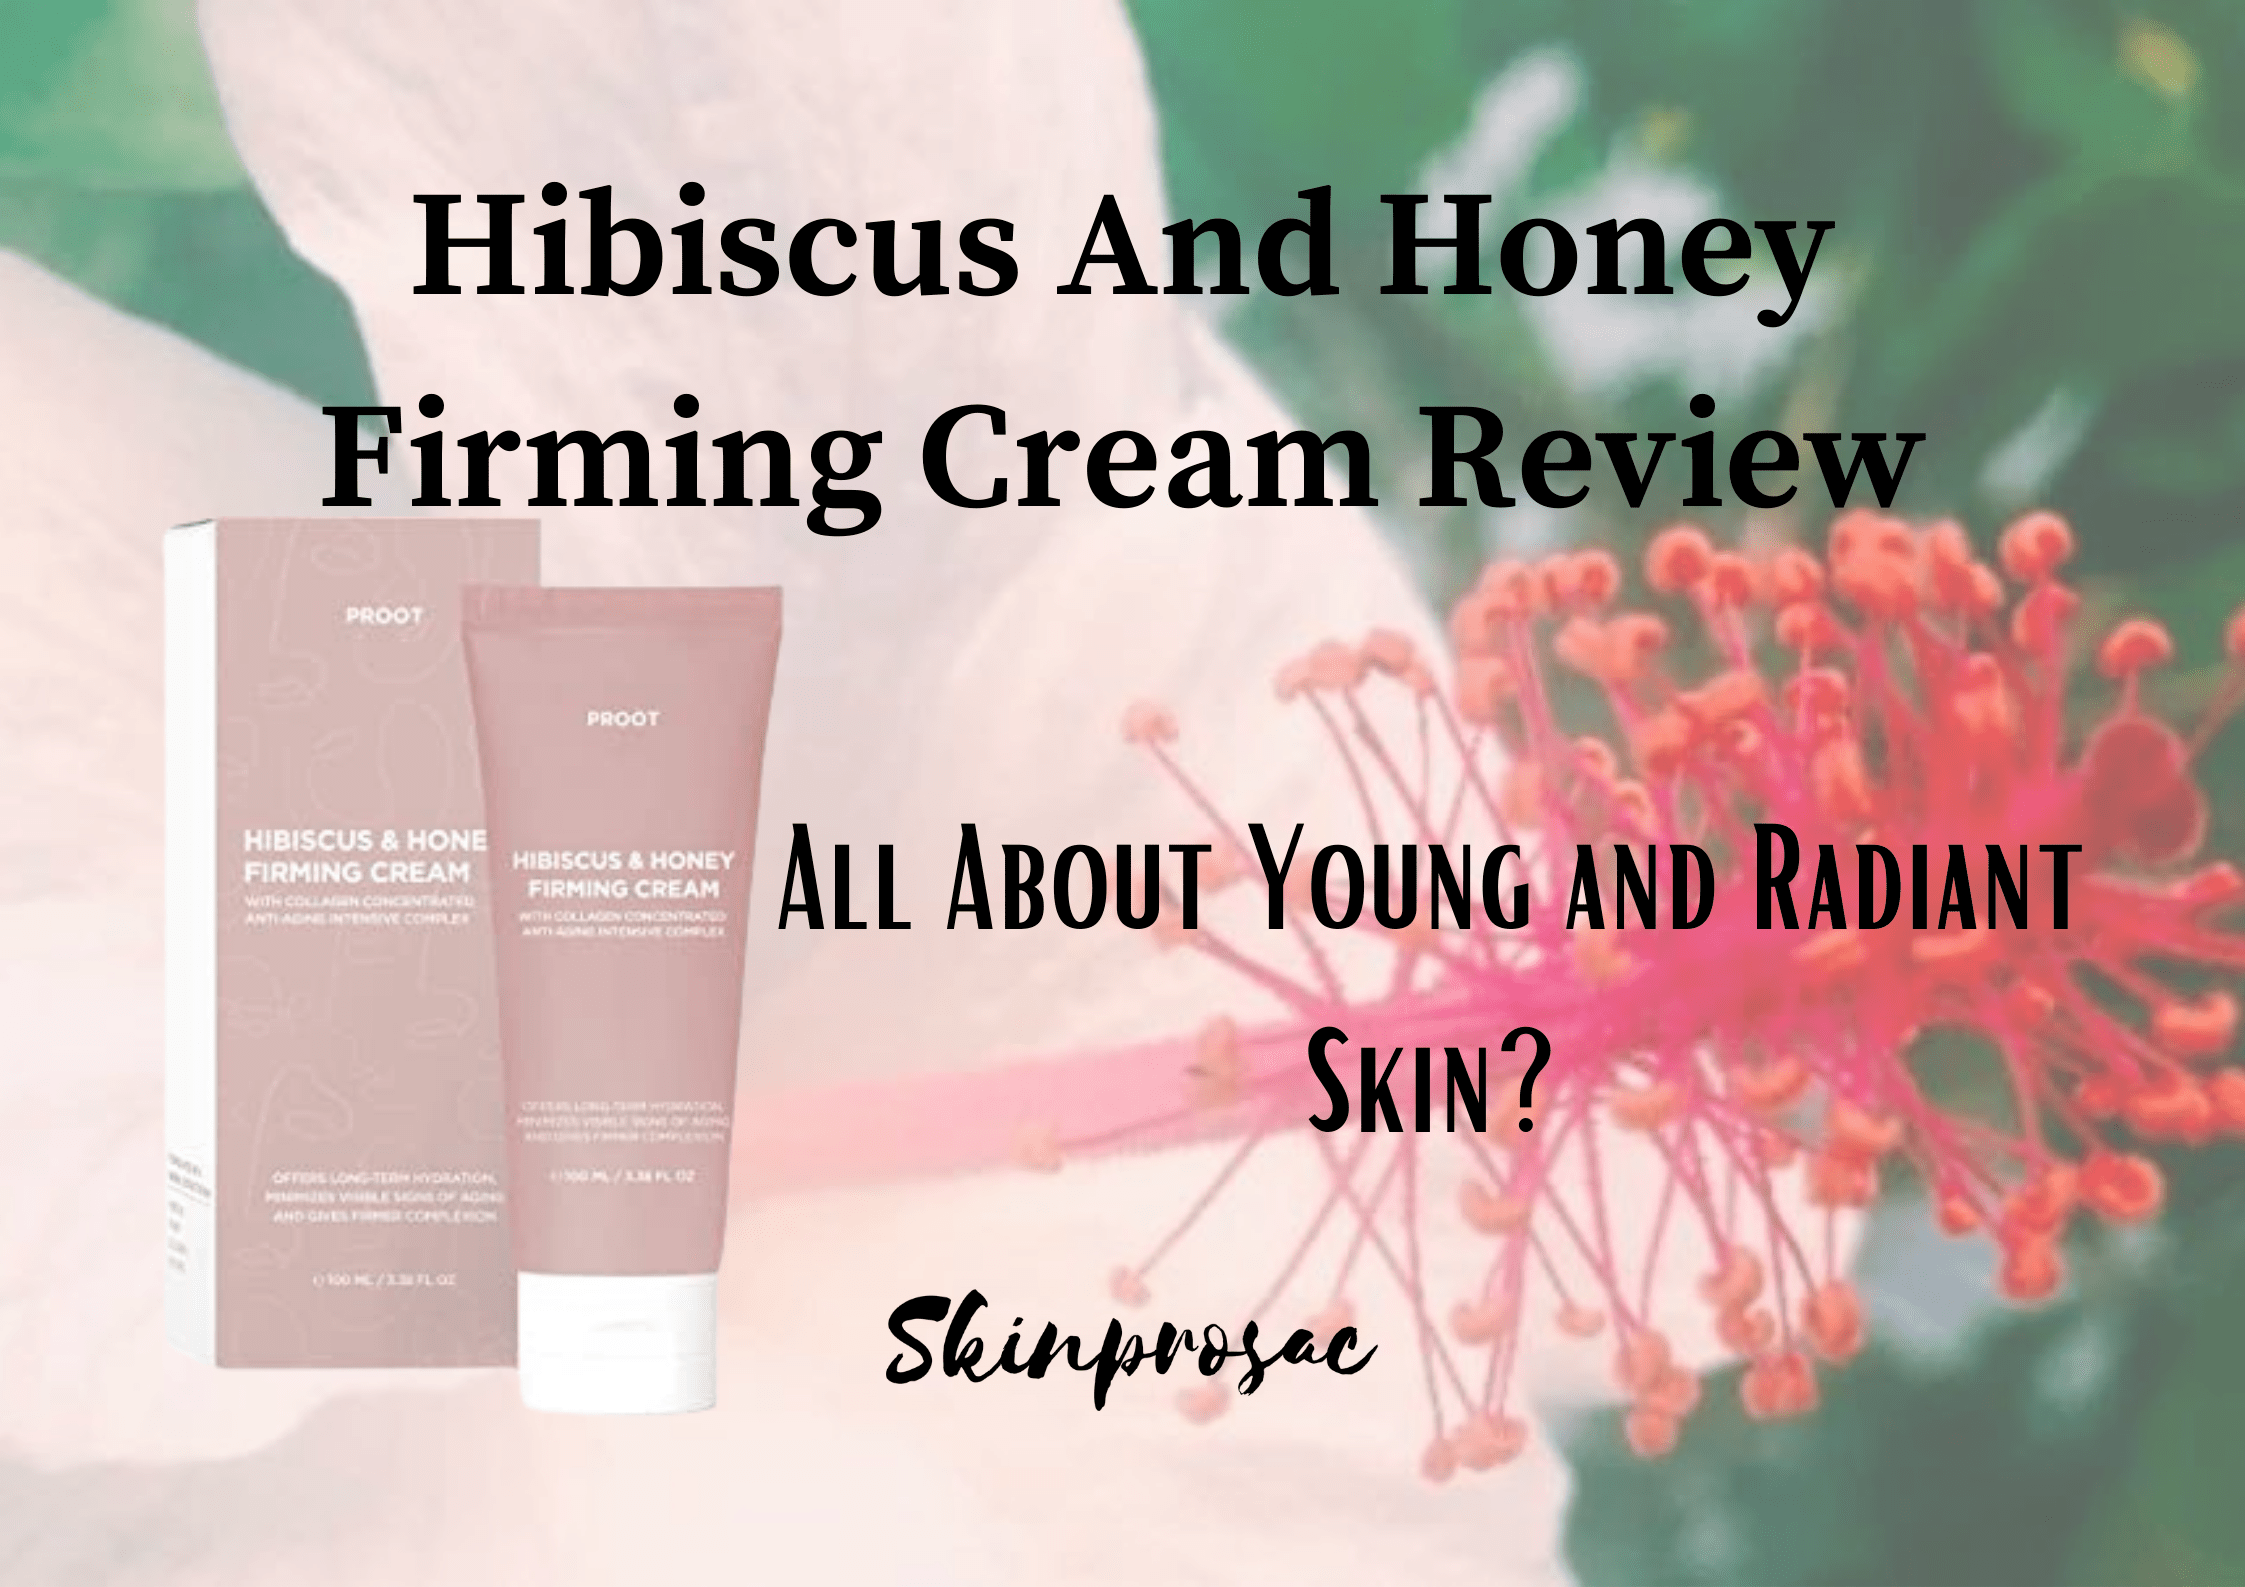 Hibiscus And Honey Firming Cream Reviews